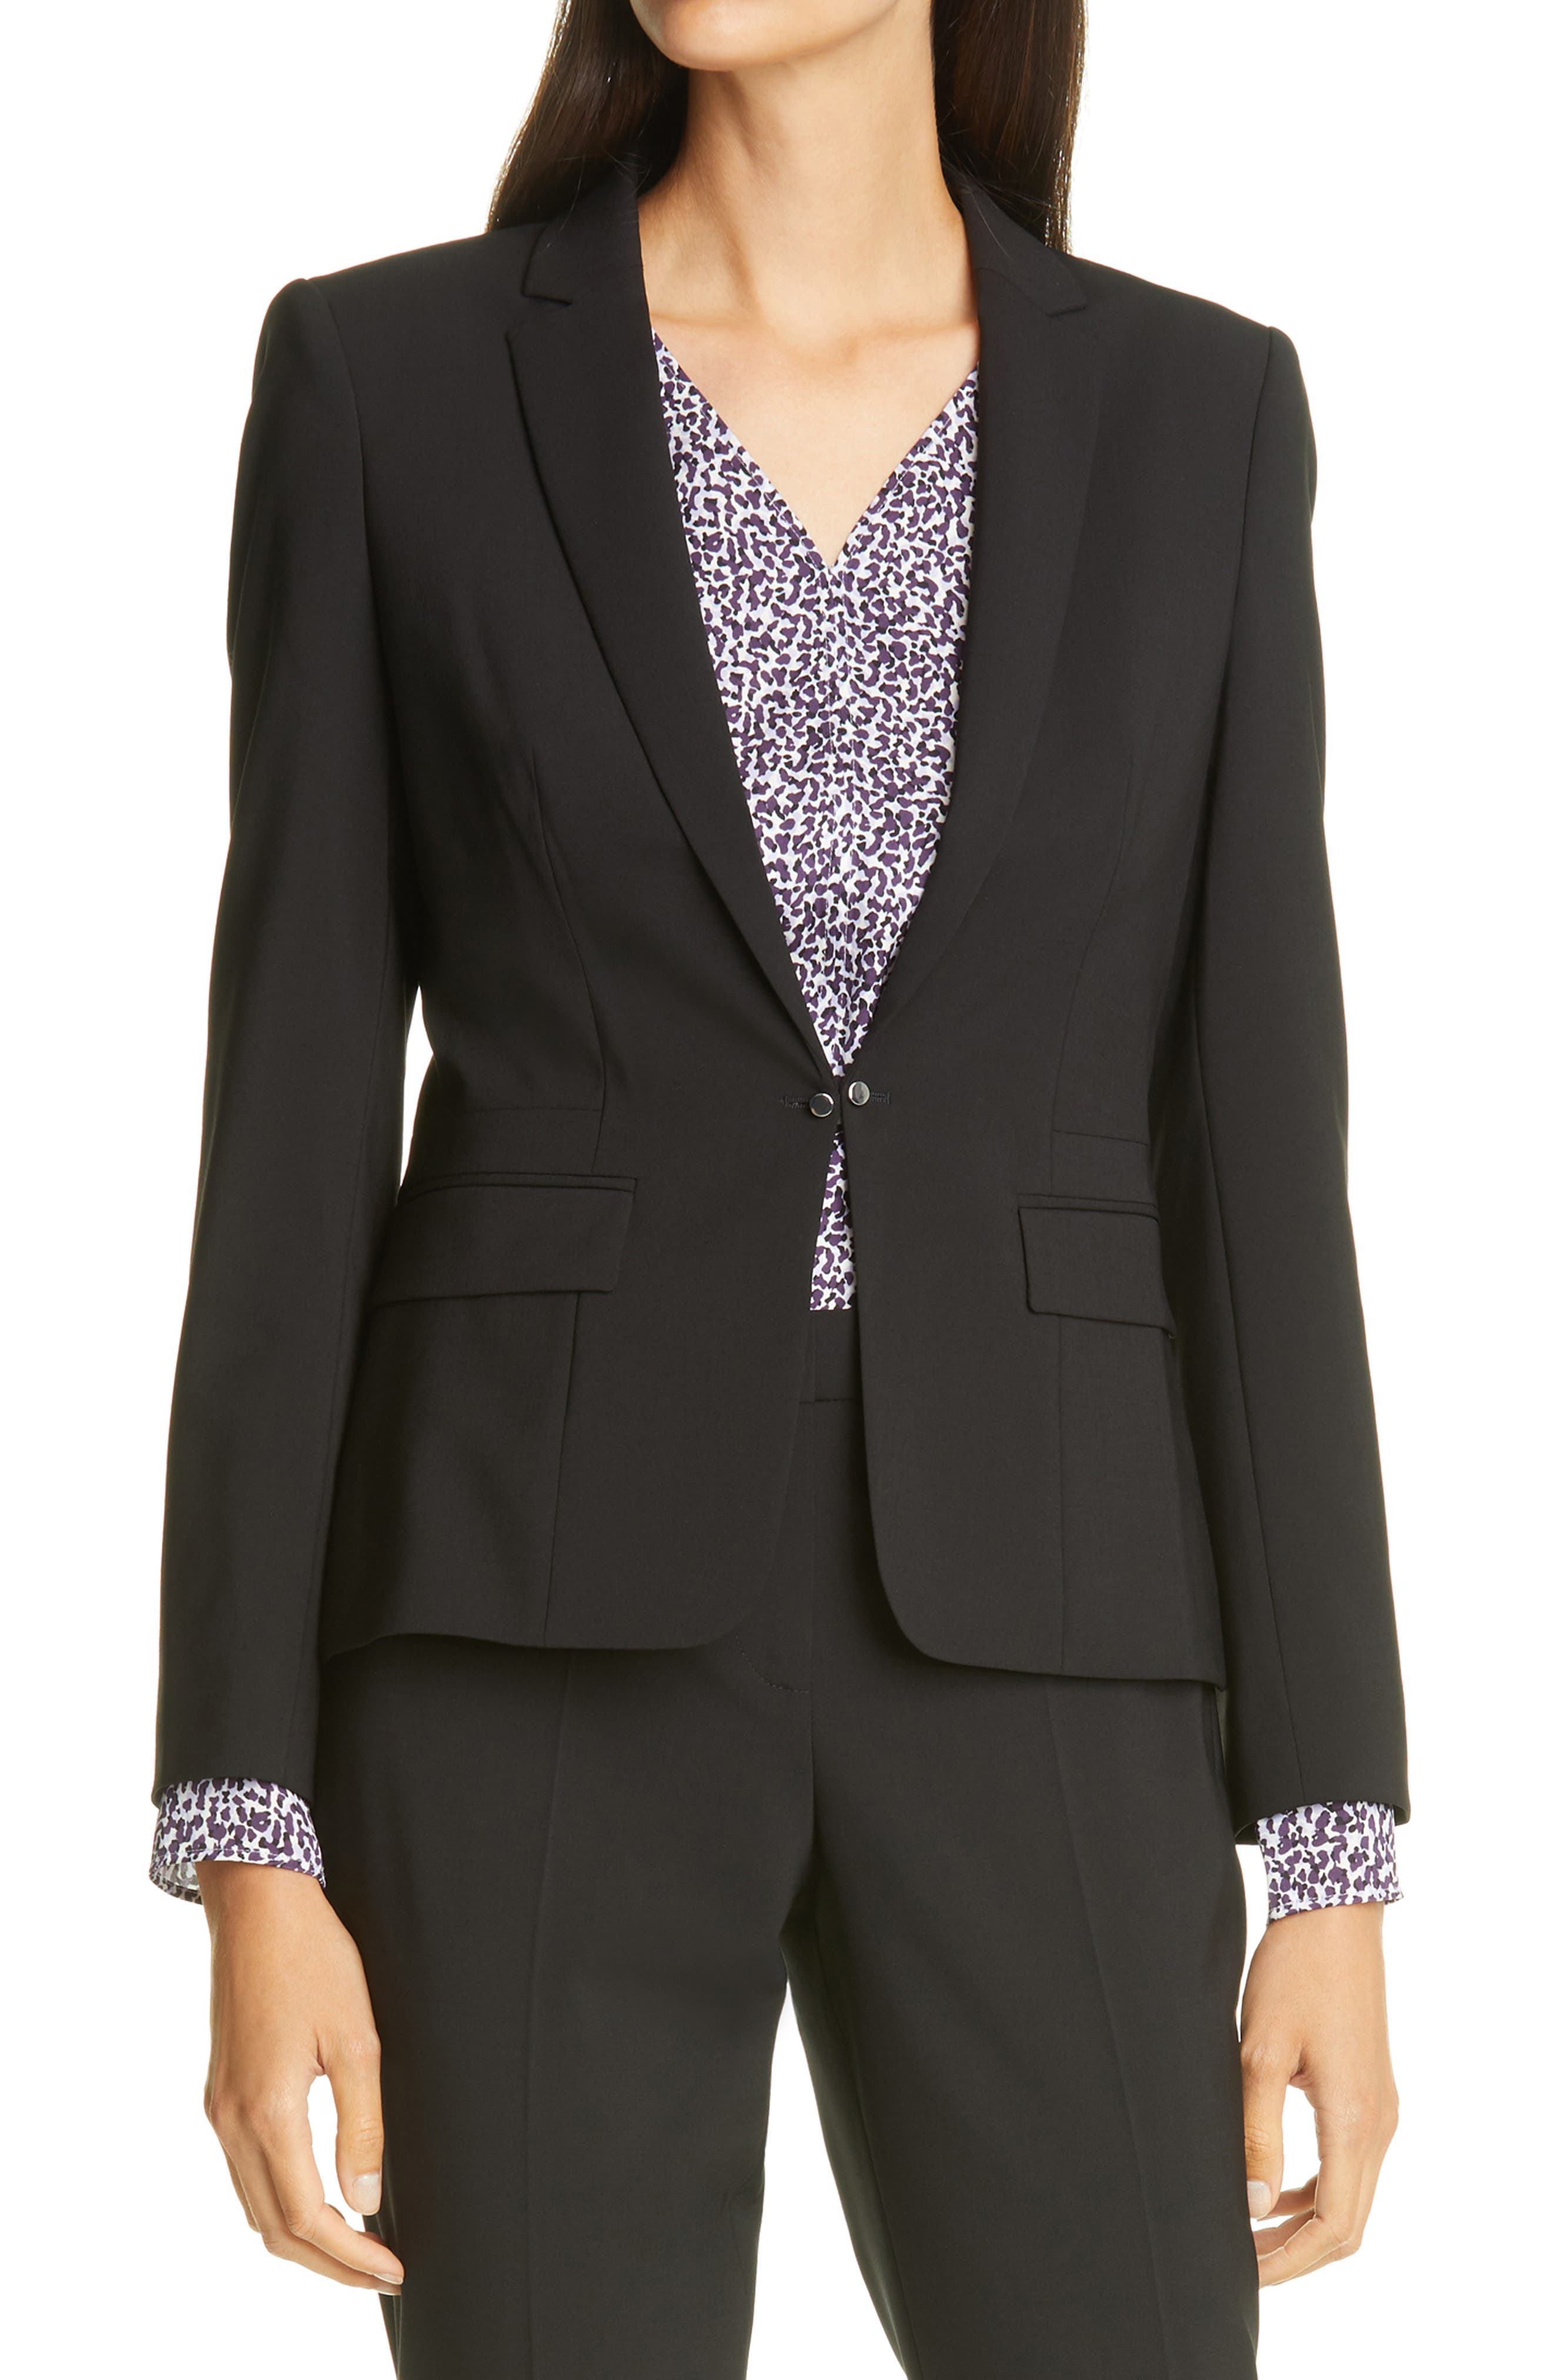 business suits for women near me